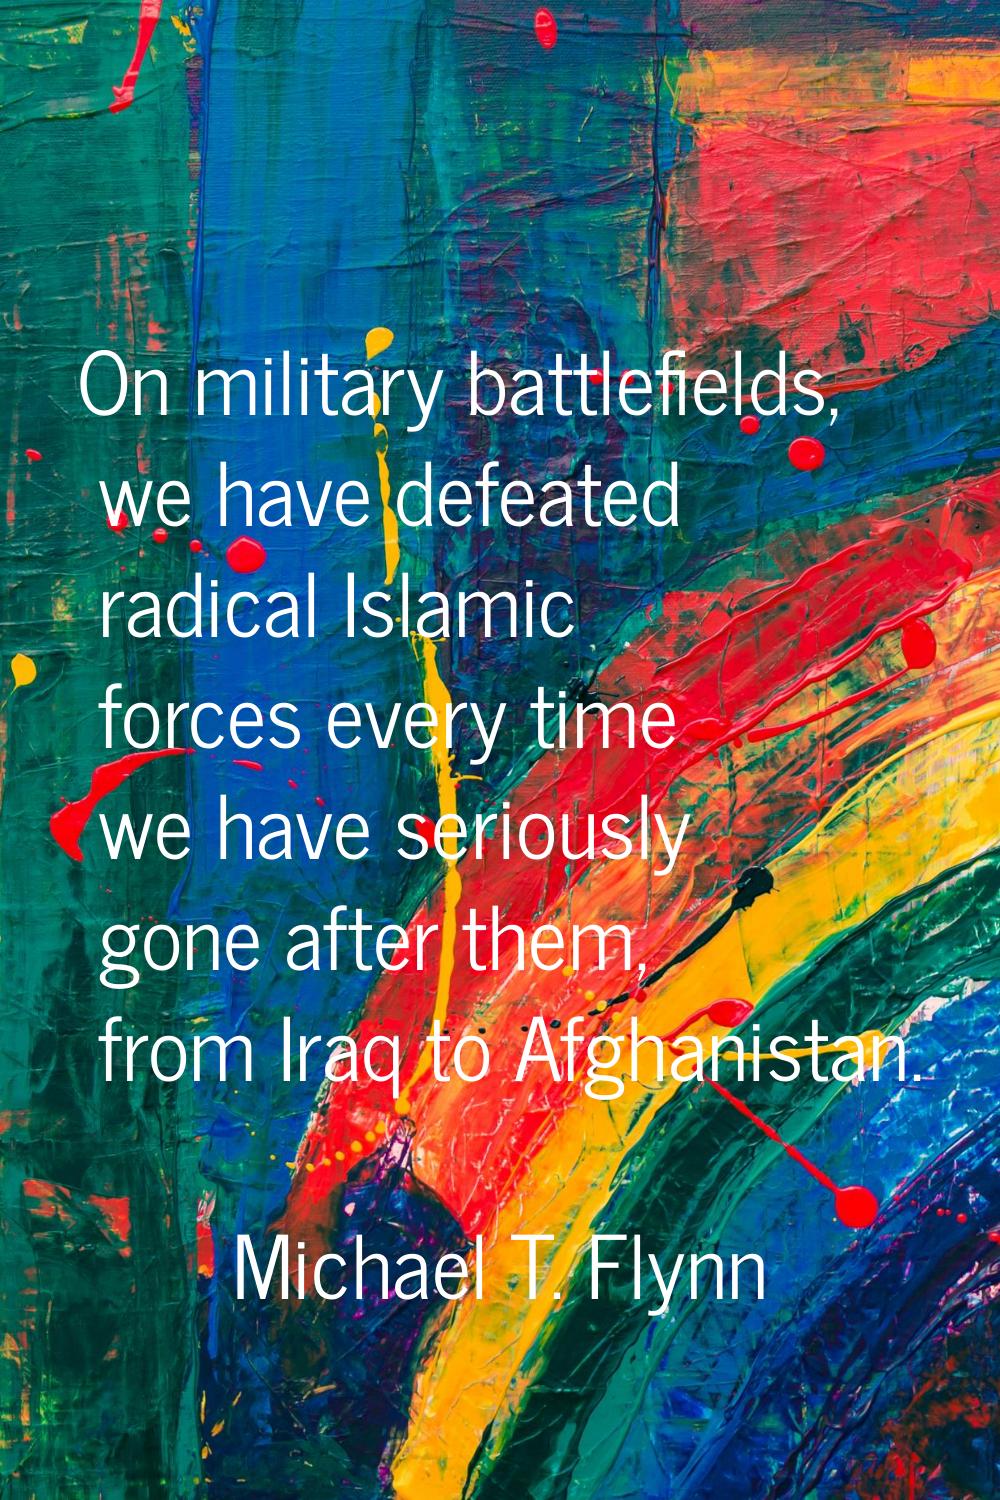 On military battlefields, we have defeated radical Islamic forces every time we have seriously gone